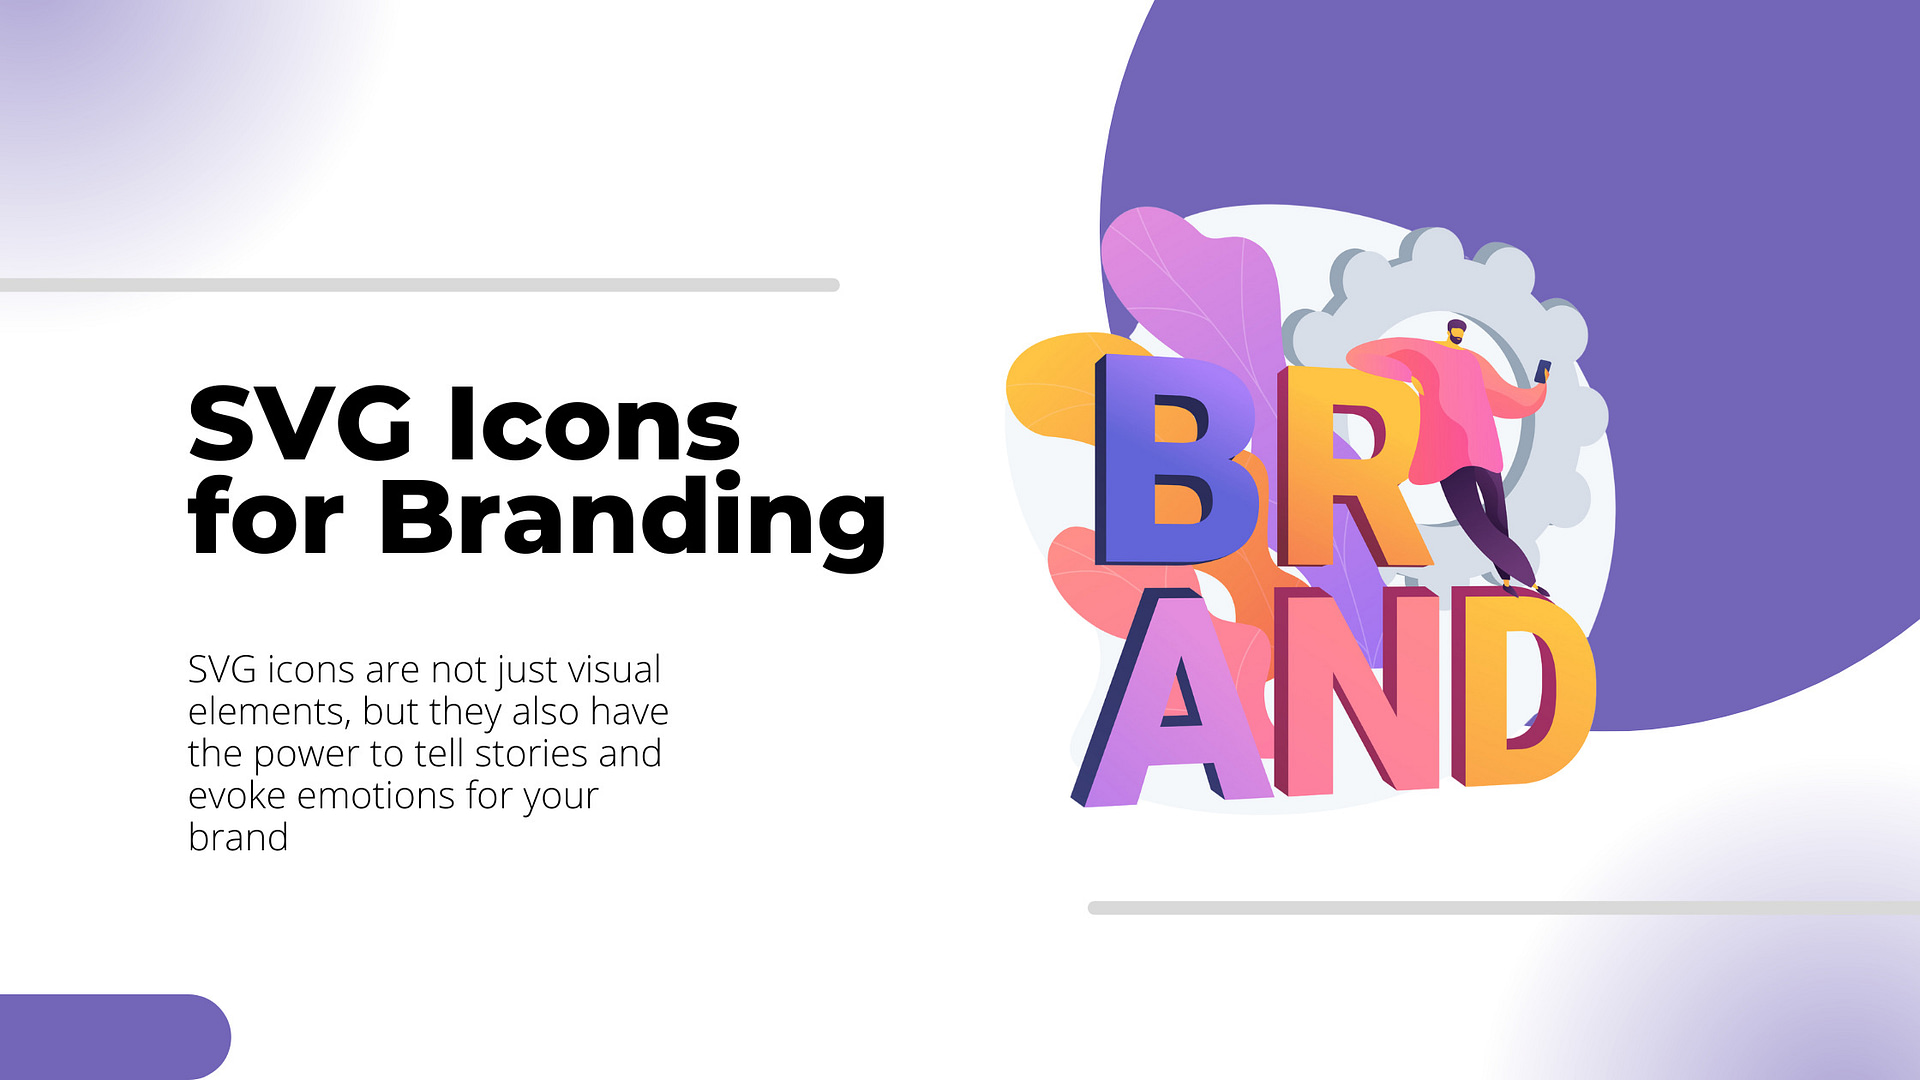 SVG icons for branding